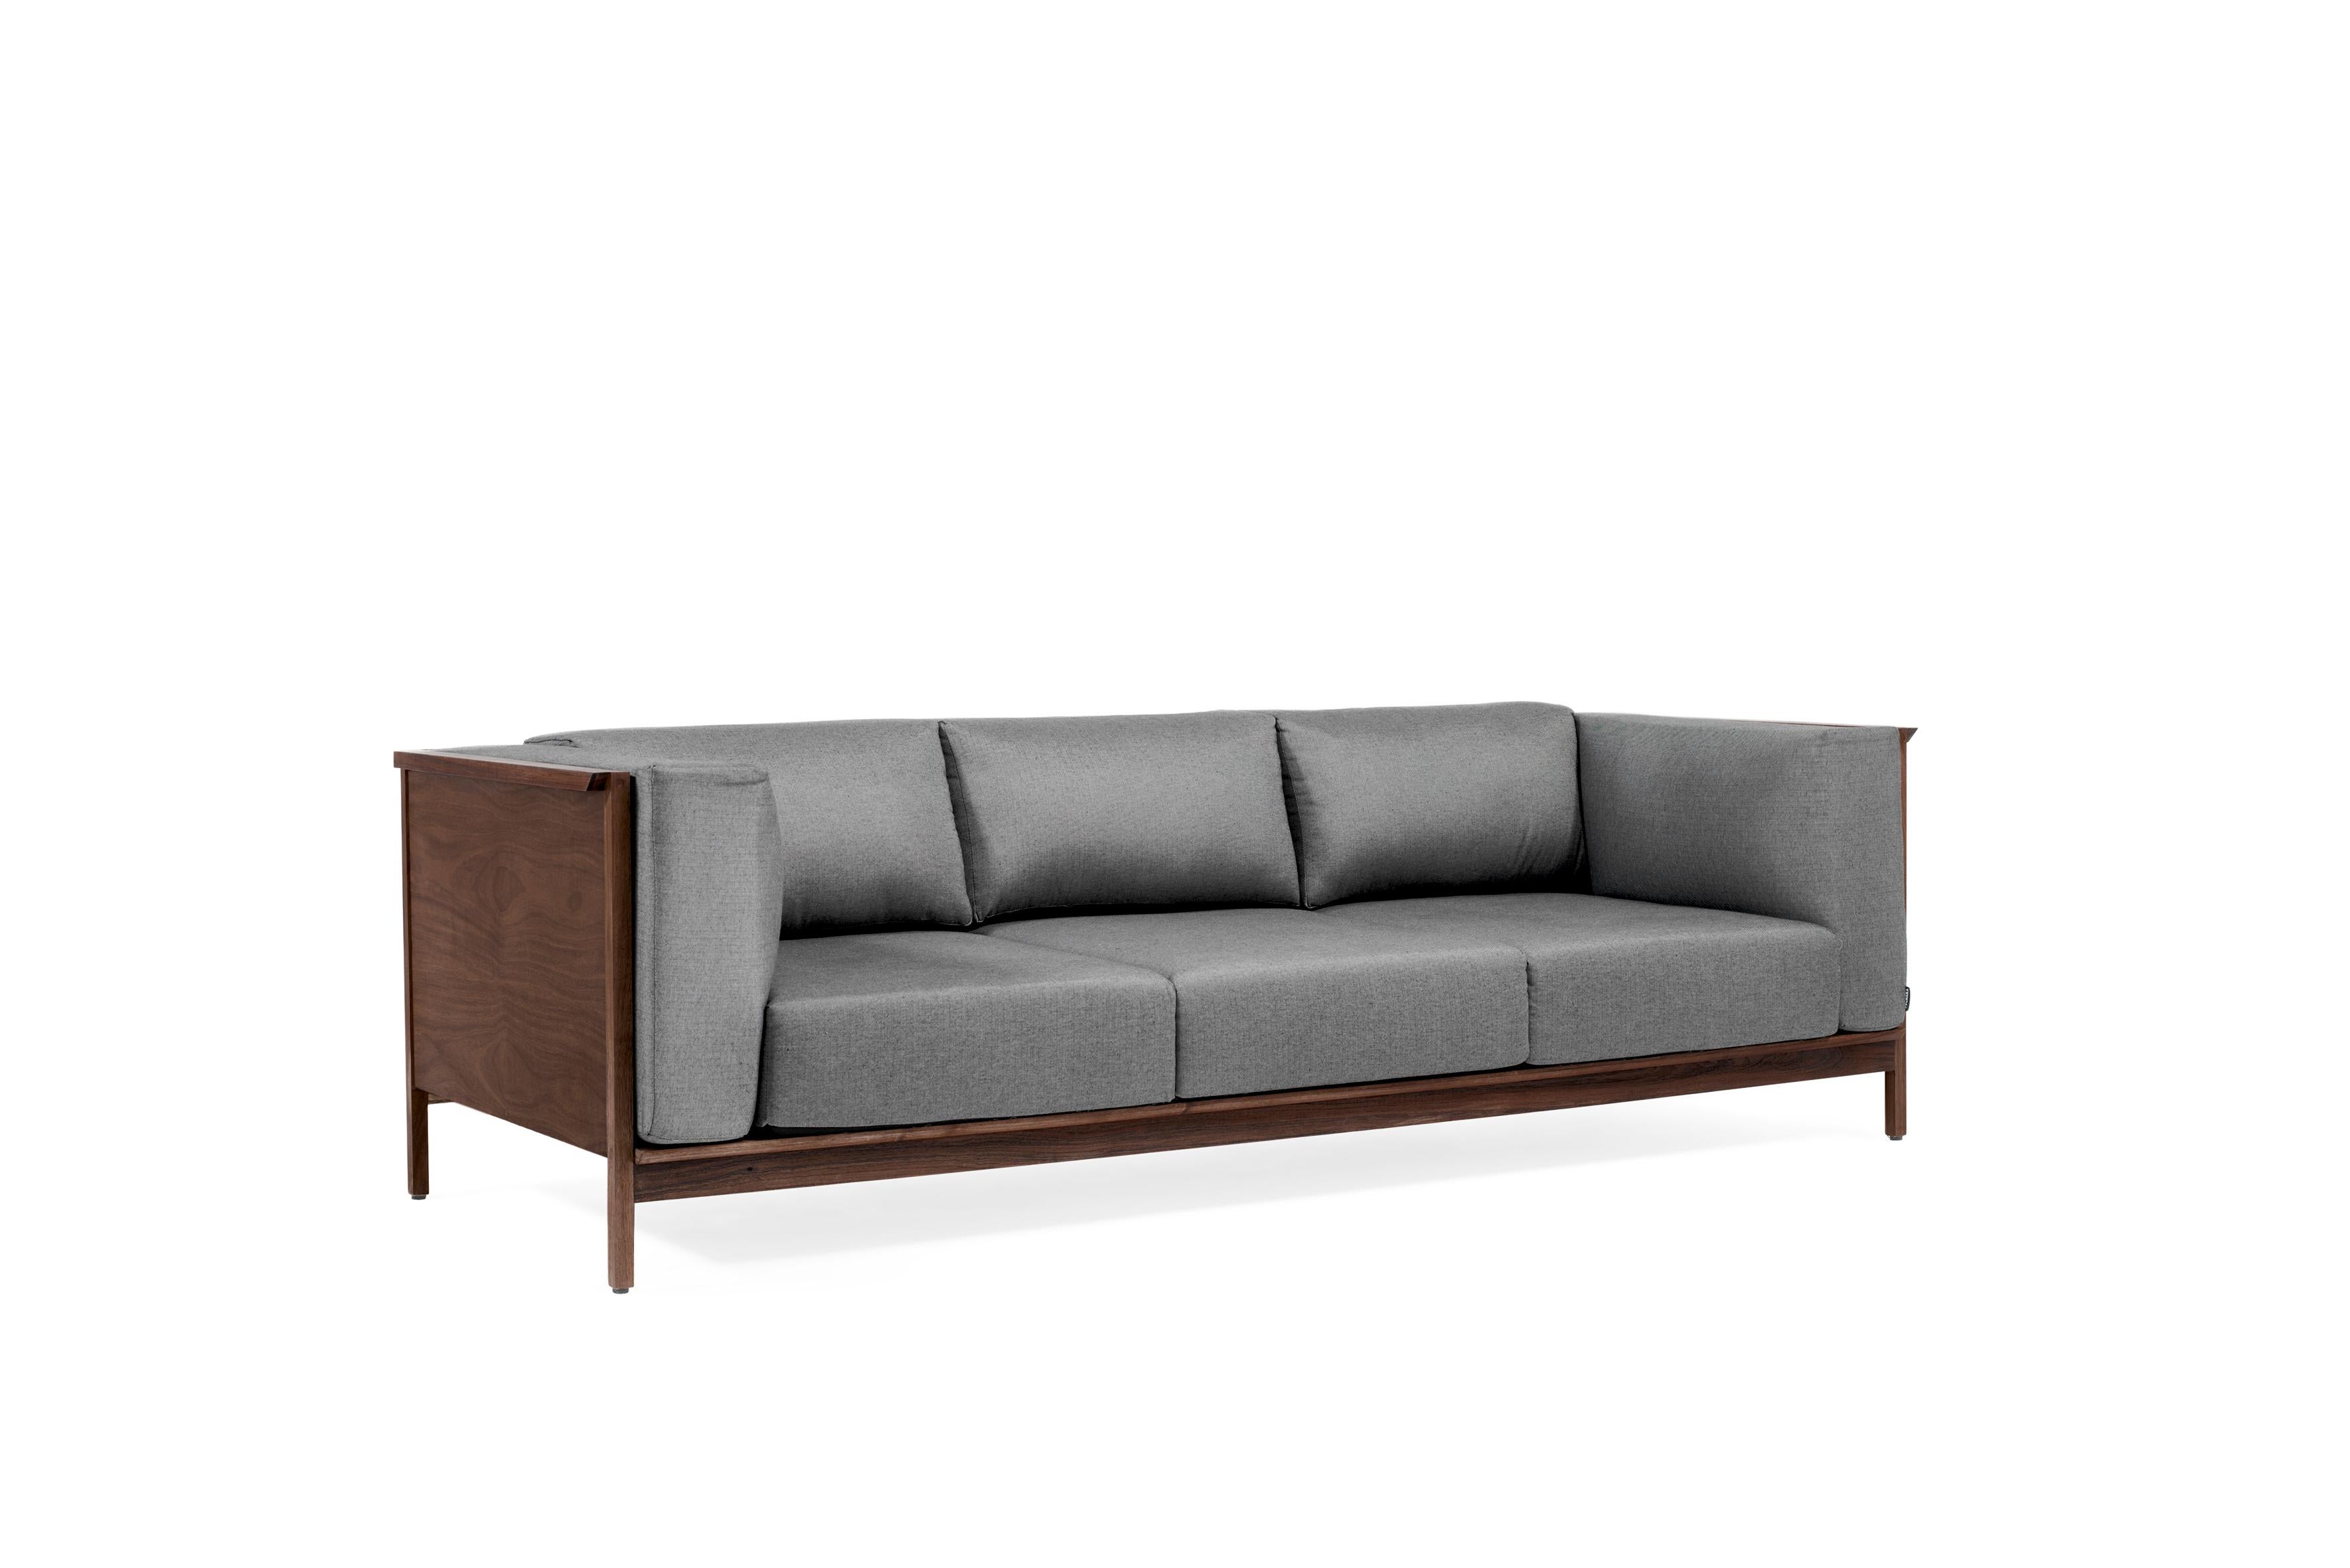 TRES PLAZAS CONFORT
Tres Plazas Confort, Mexican Contemporary Sofa by Emiliano Molina for CUCHARA

The CONFORT Collection: solid wood structures that function as a container for a soft cushioning system. Sofas and stools with availability of